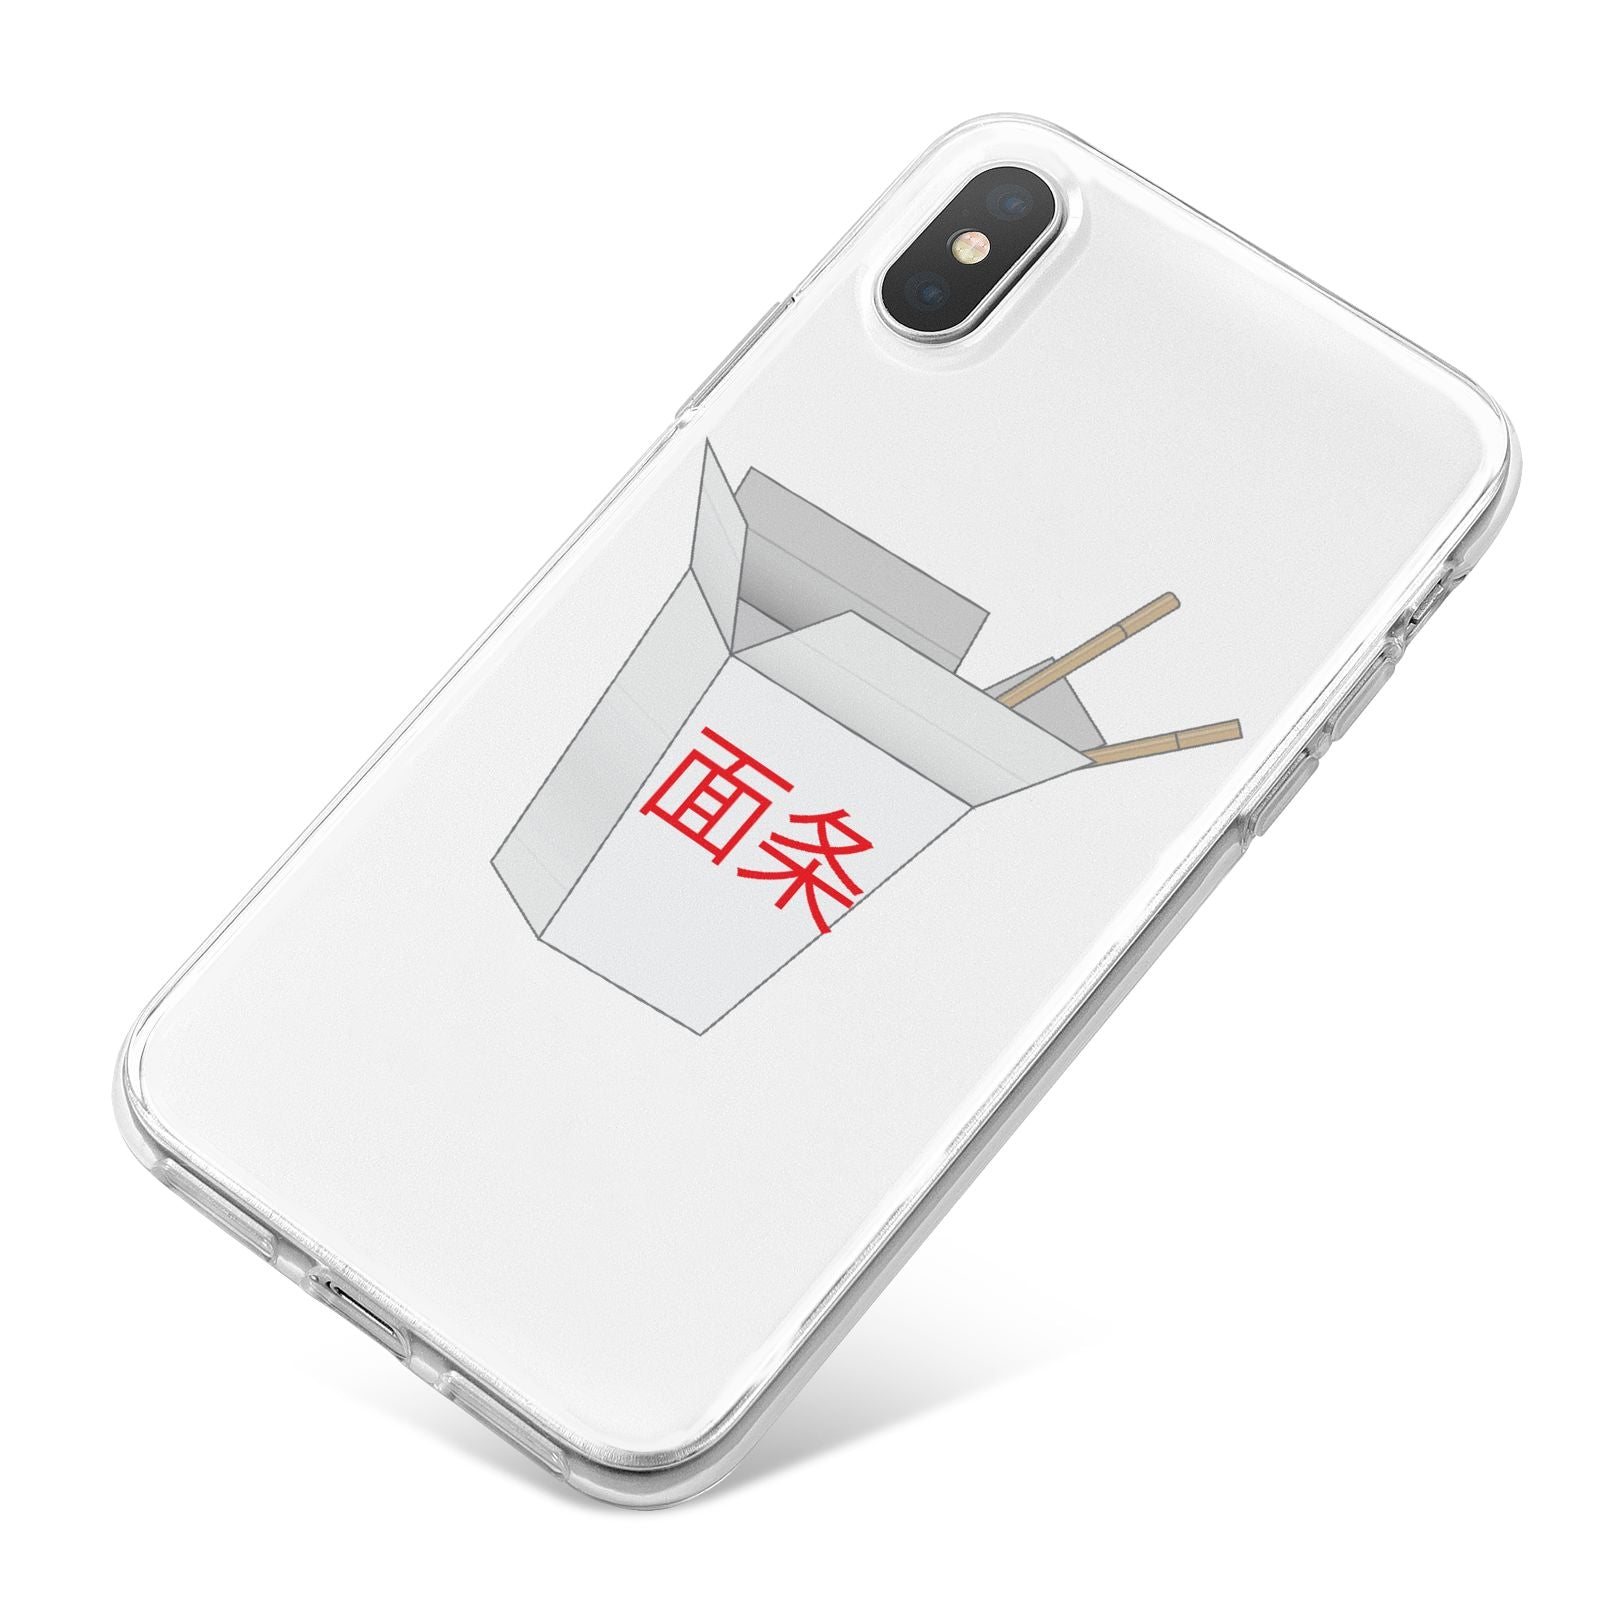 Chinese Takeaway Box iPhone X Bumper Case on Silver iPhone